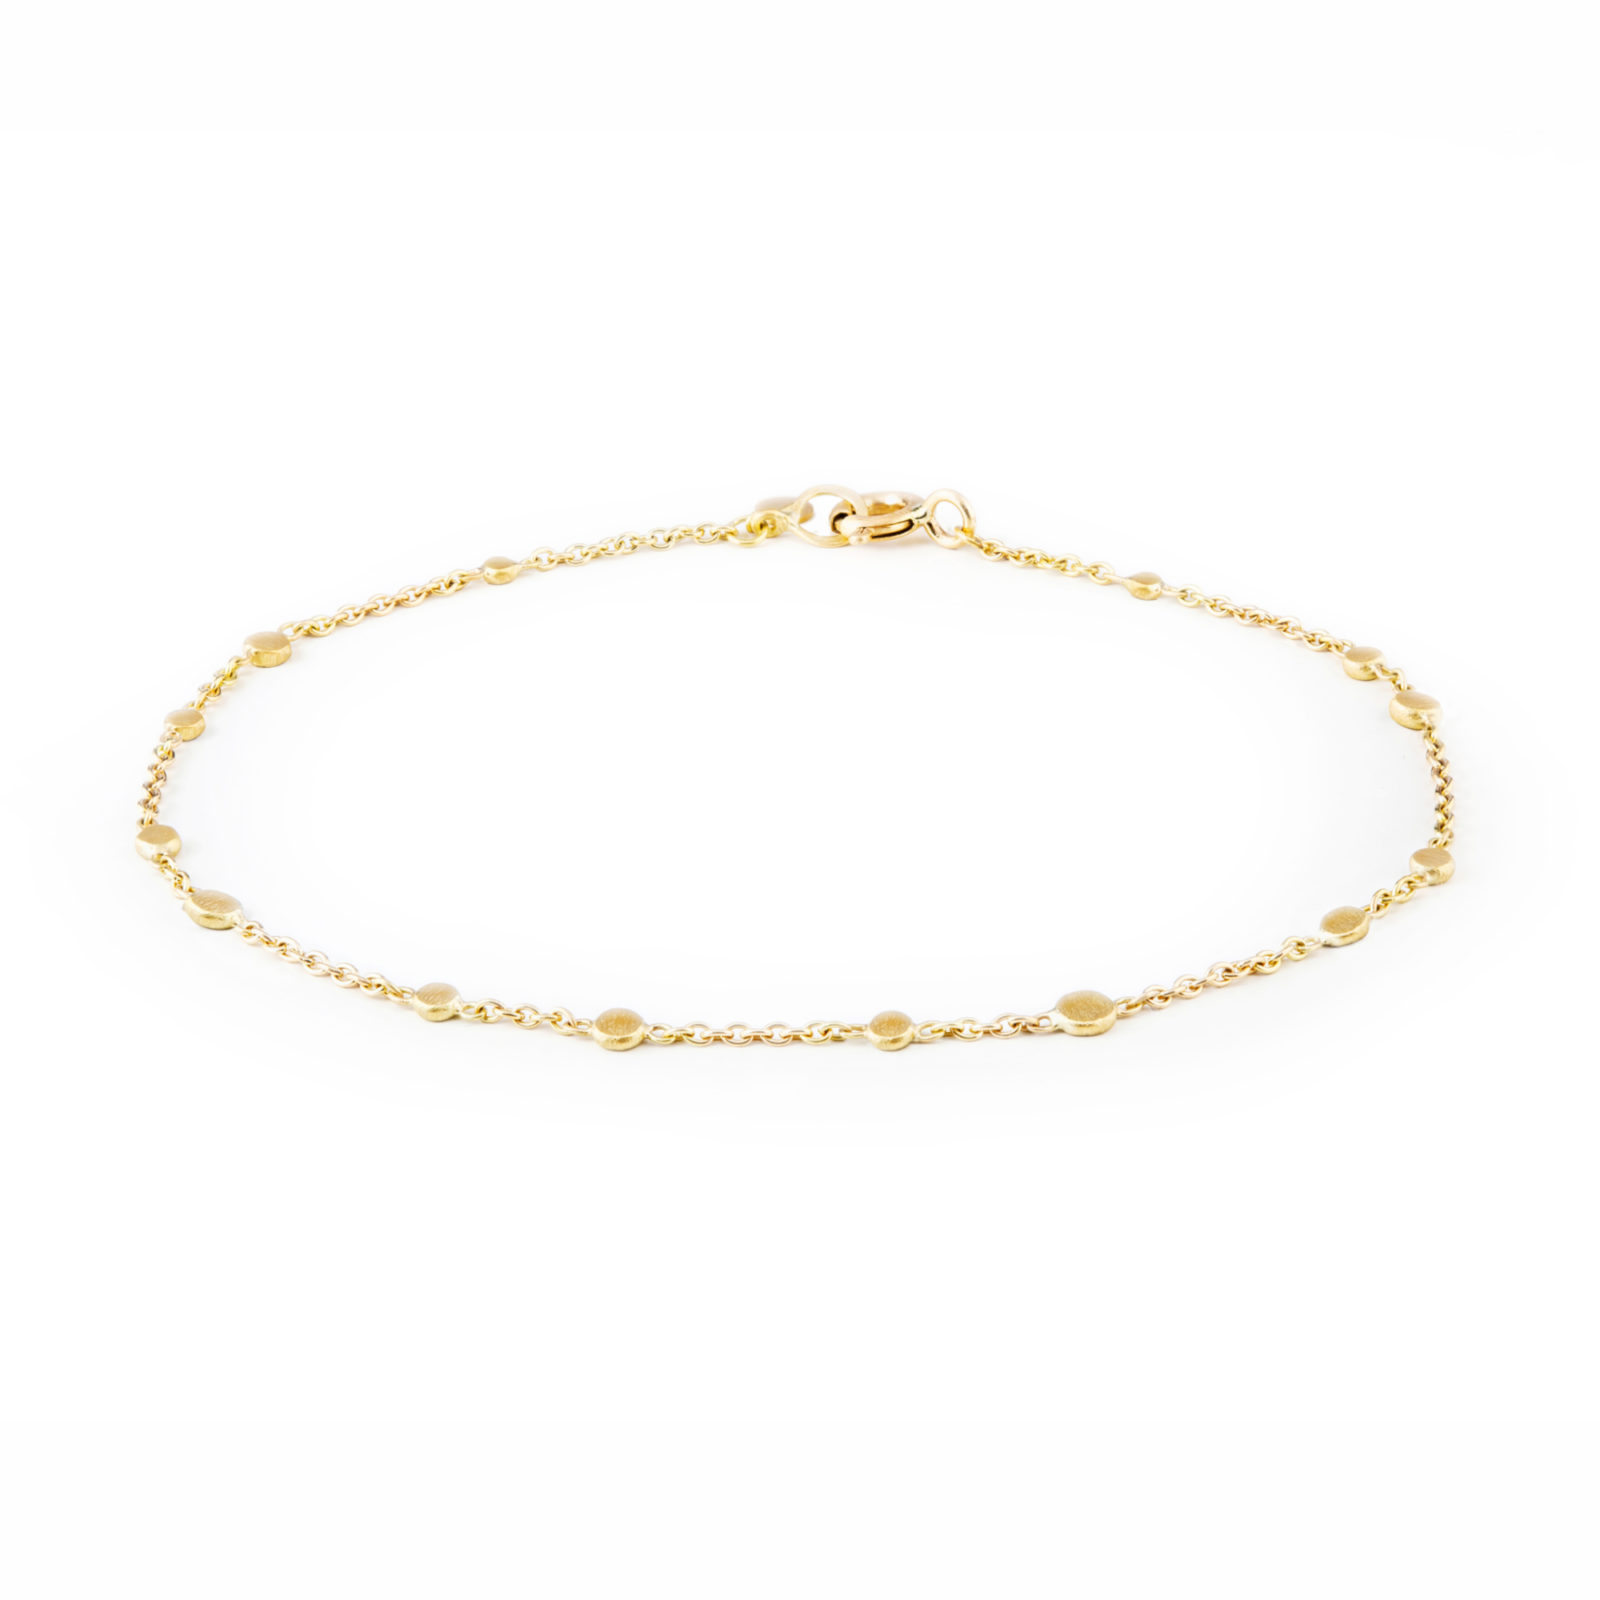 Sia Taylor SB1 Y Yellow Gold Scattered Dust Bracelet WB